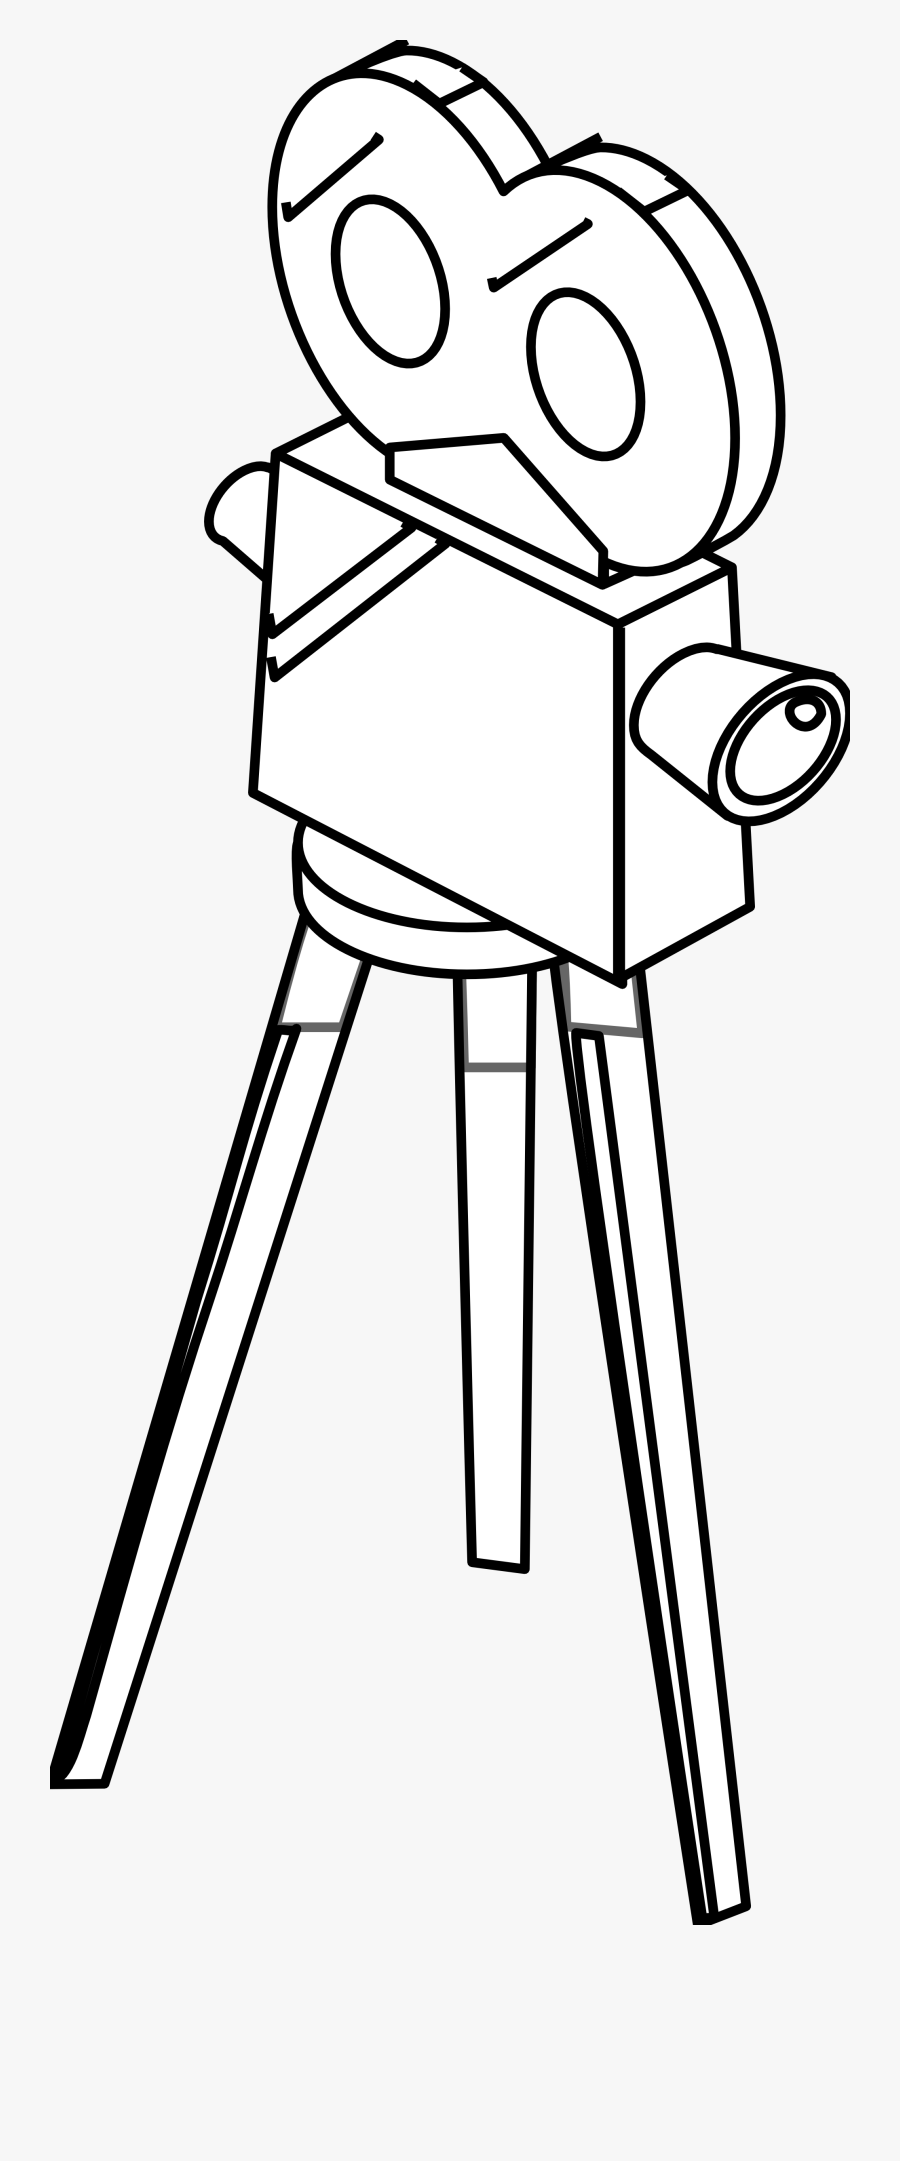 Movie Theater Clipart Black Coloring Page, Printable - Film Camera Coloring, Transparent Clipart